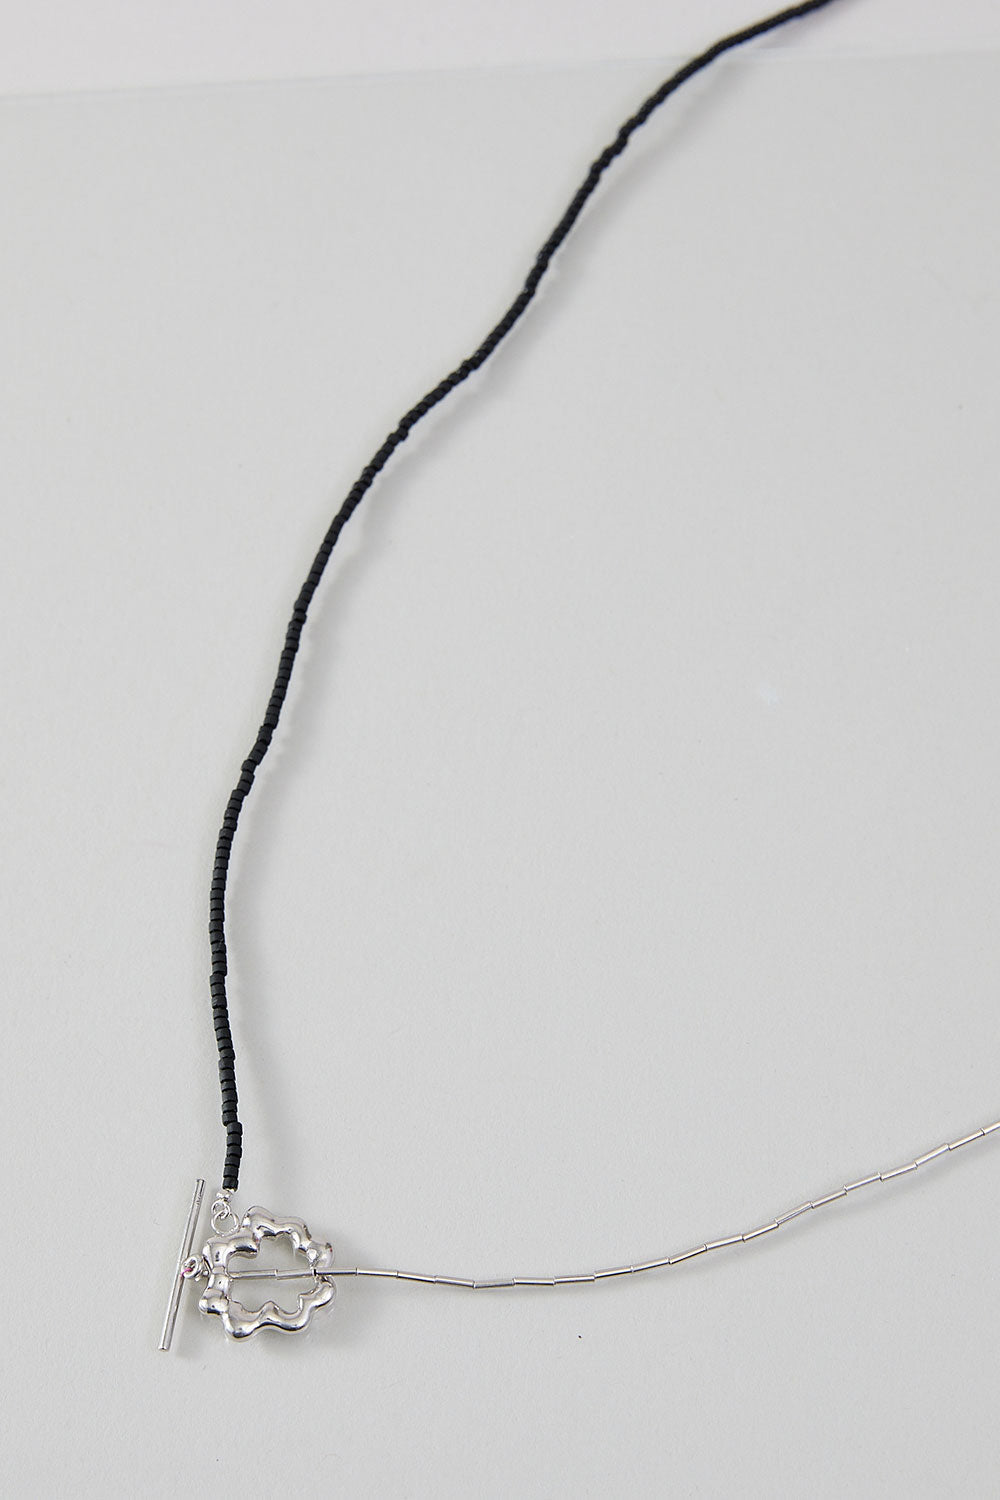 STONE & SILVER BEADS NECKLACE 83CM